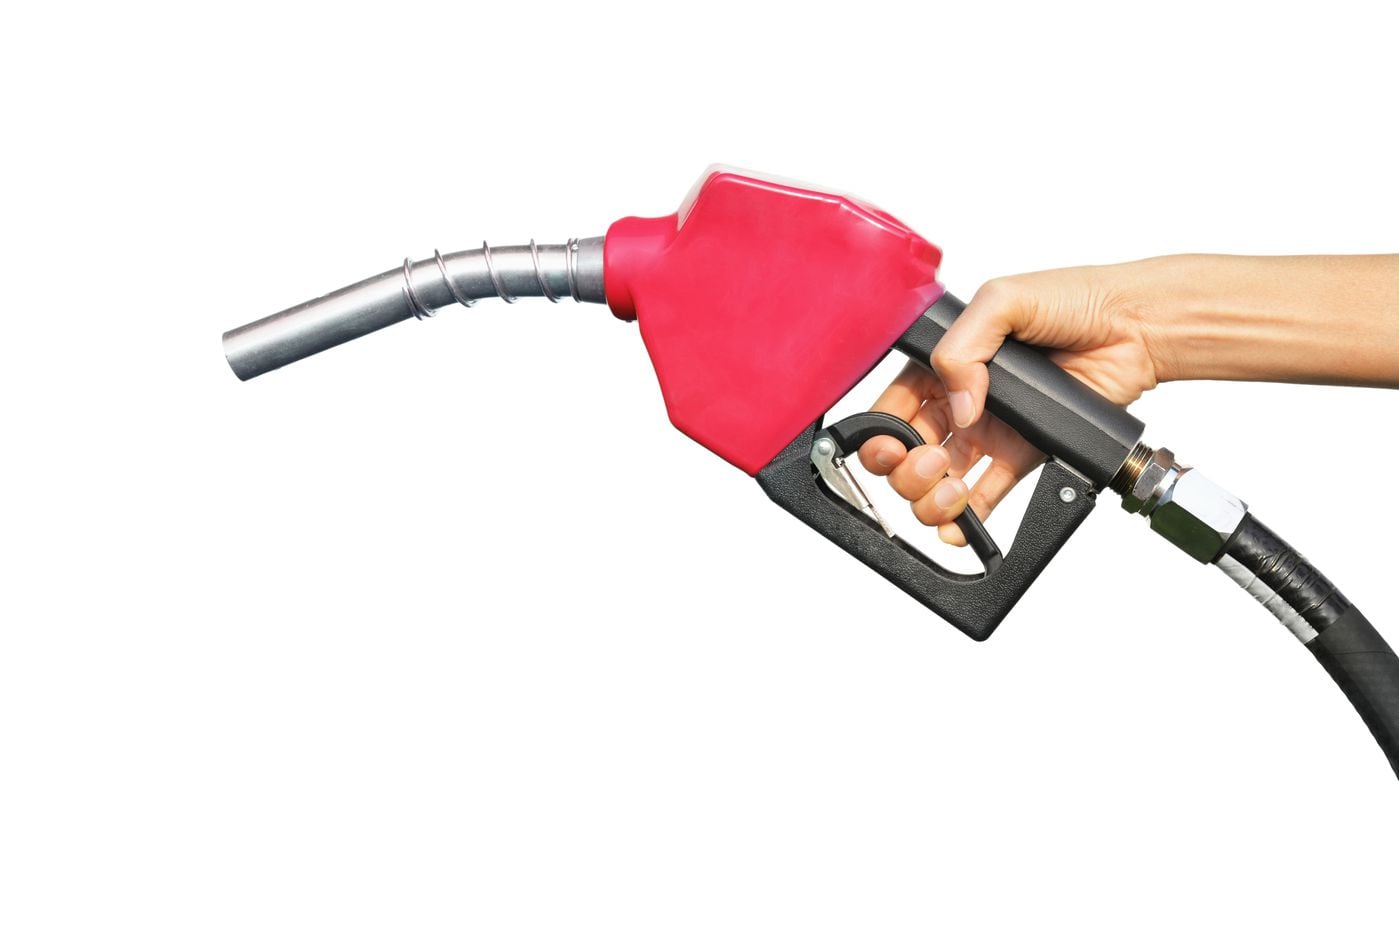 Gasoline prices dipped to $3.78 a gallon in April from $3.90 in March, but still higher than...